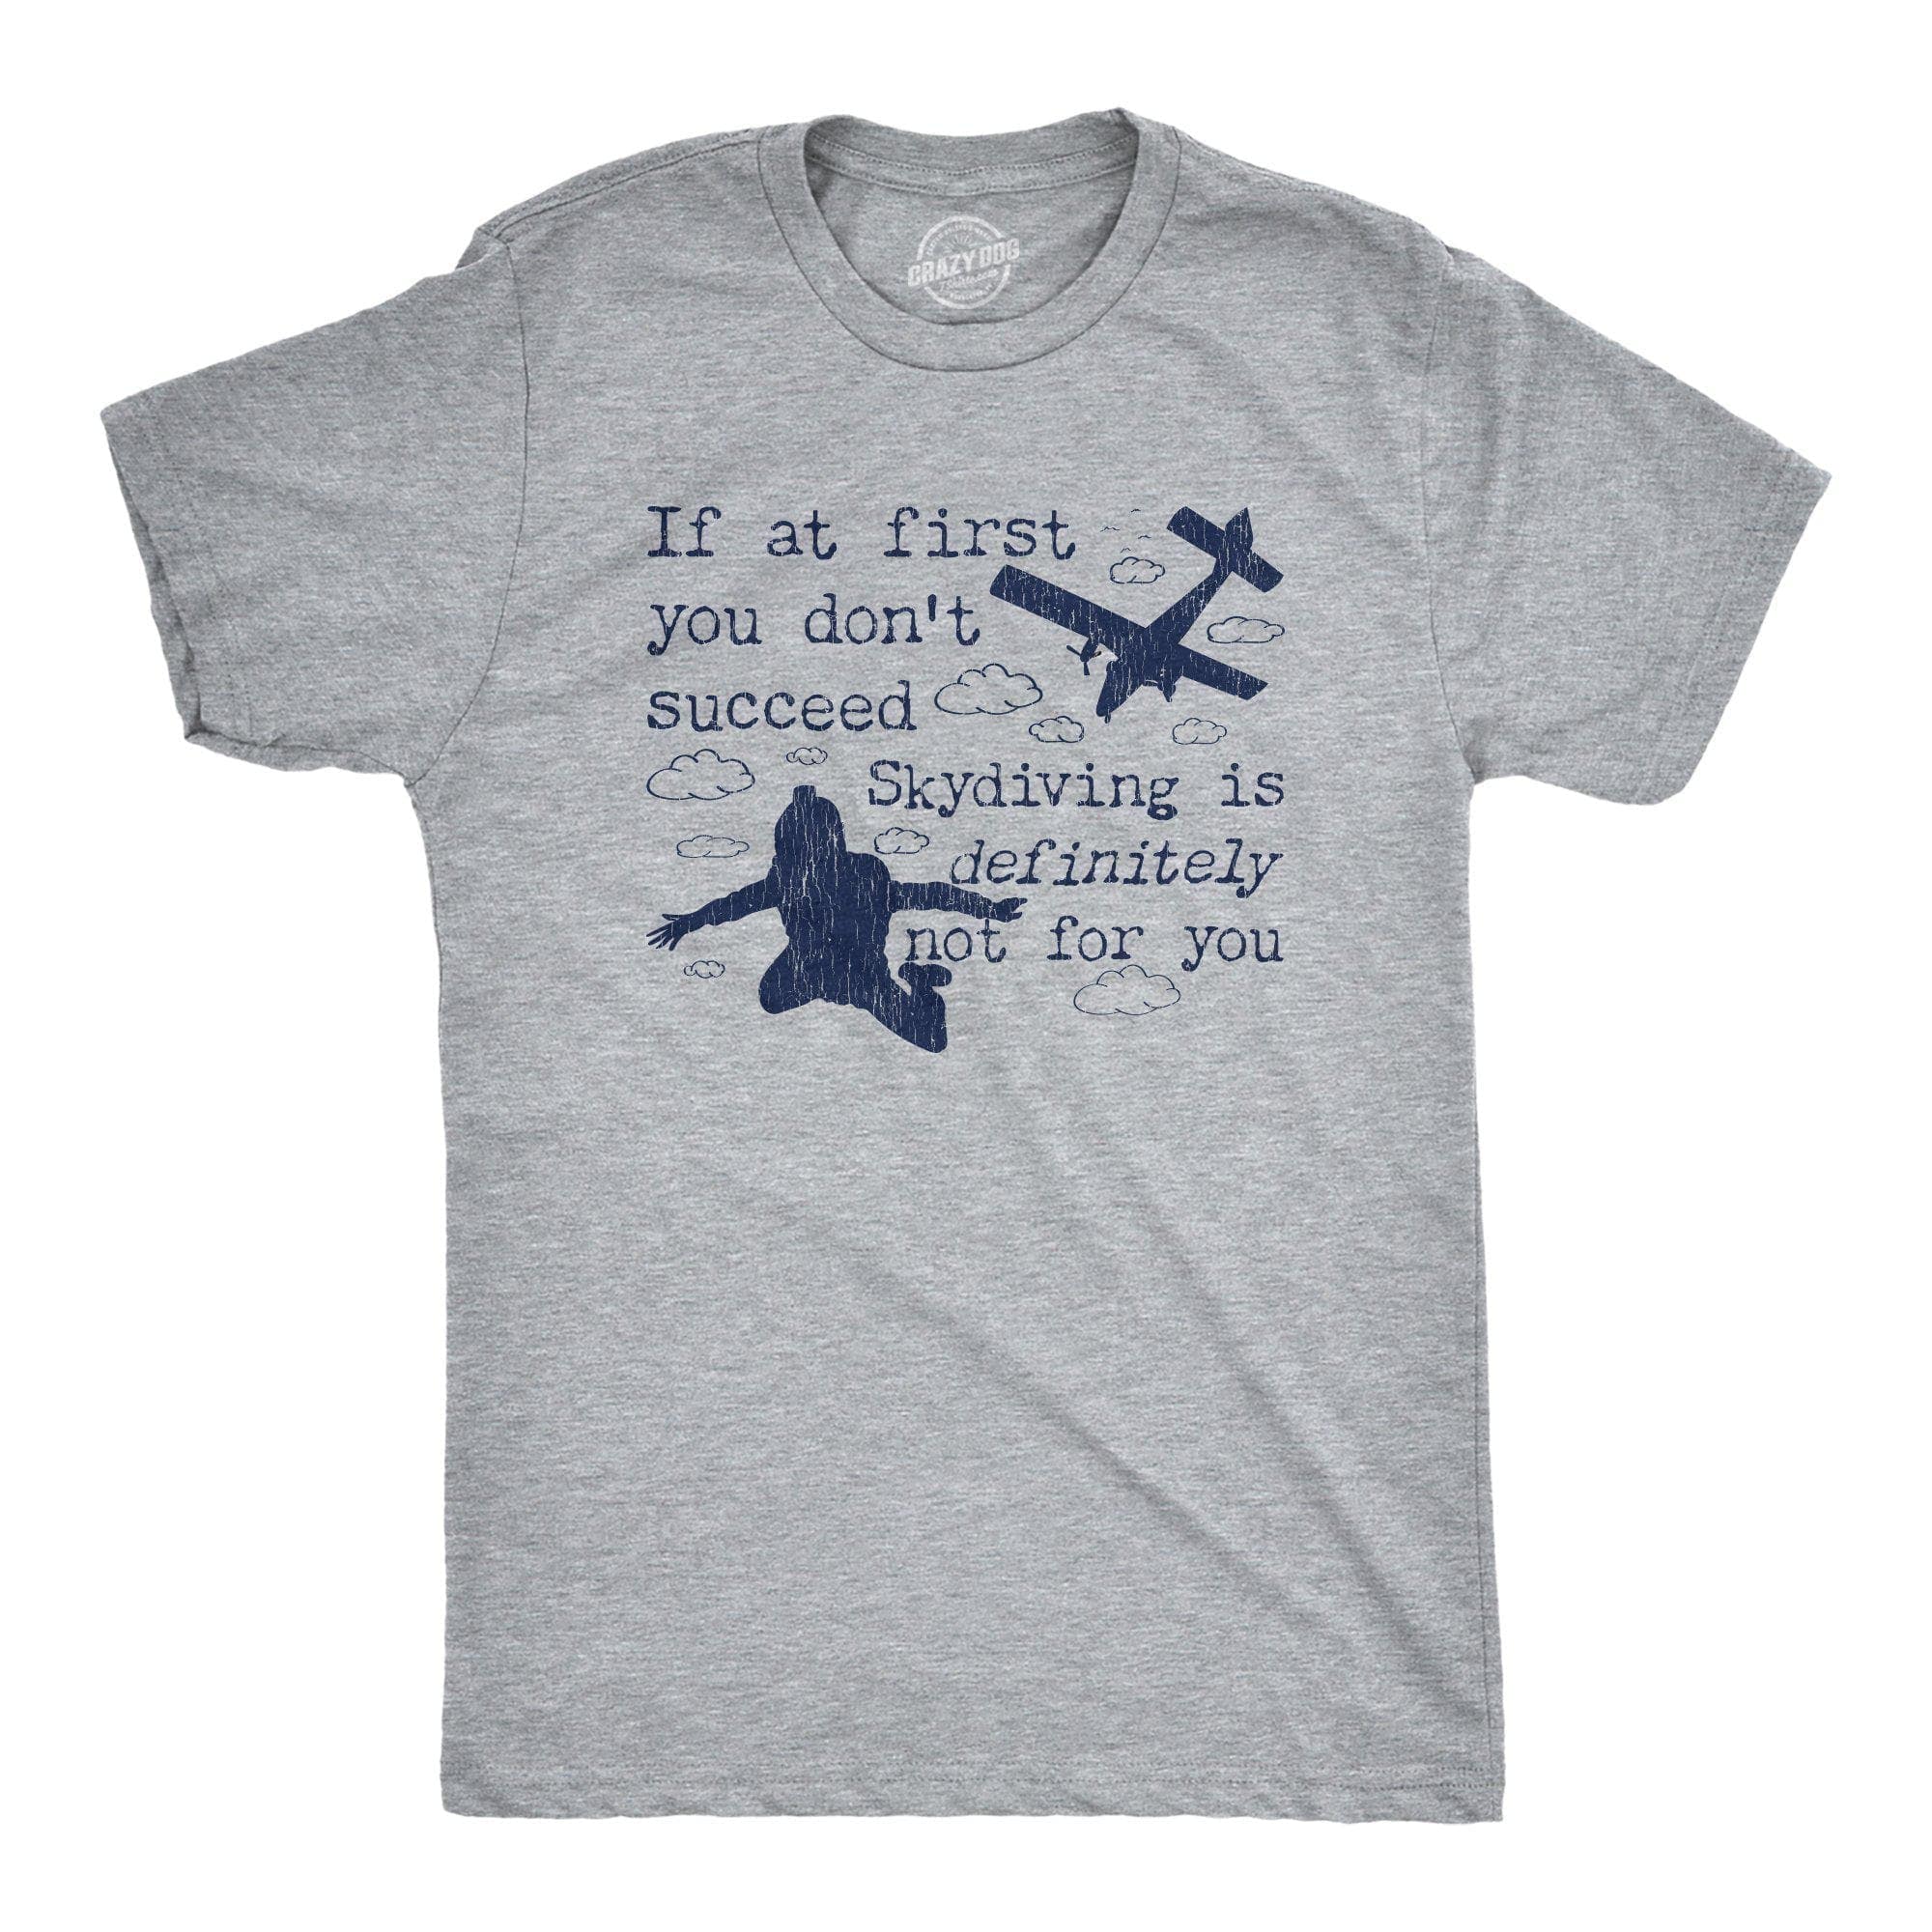 If At First You Don't Succeed Skydiving Is Definitely Not For You Men's Tshirt - Crazy Dog T-Shirts